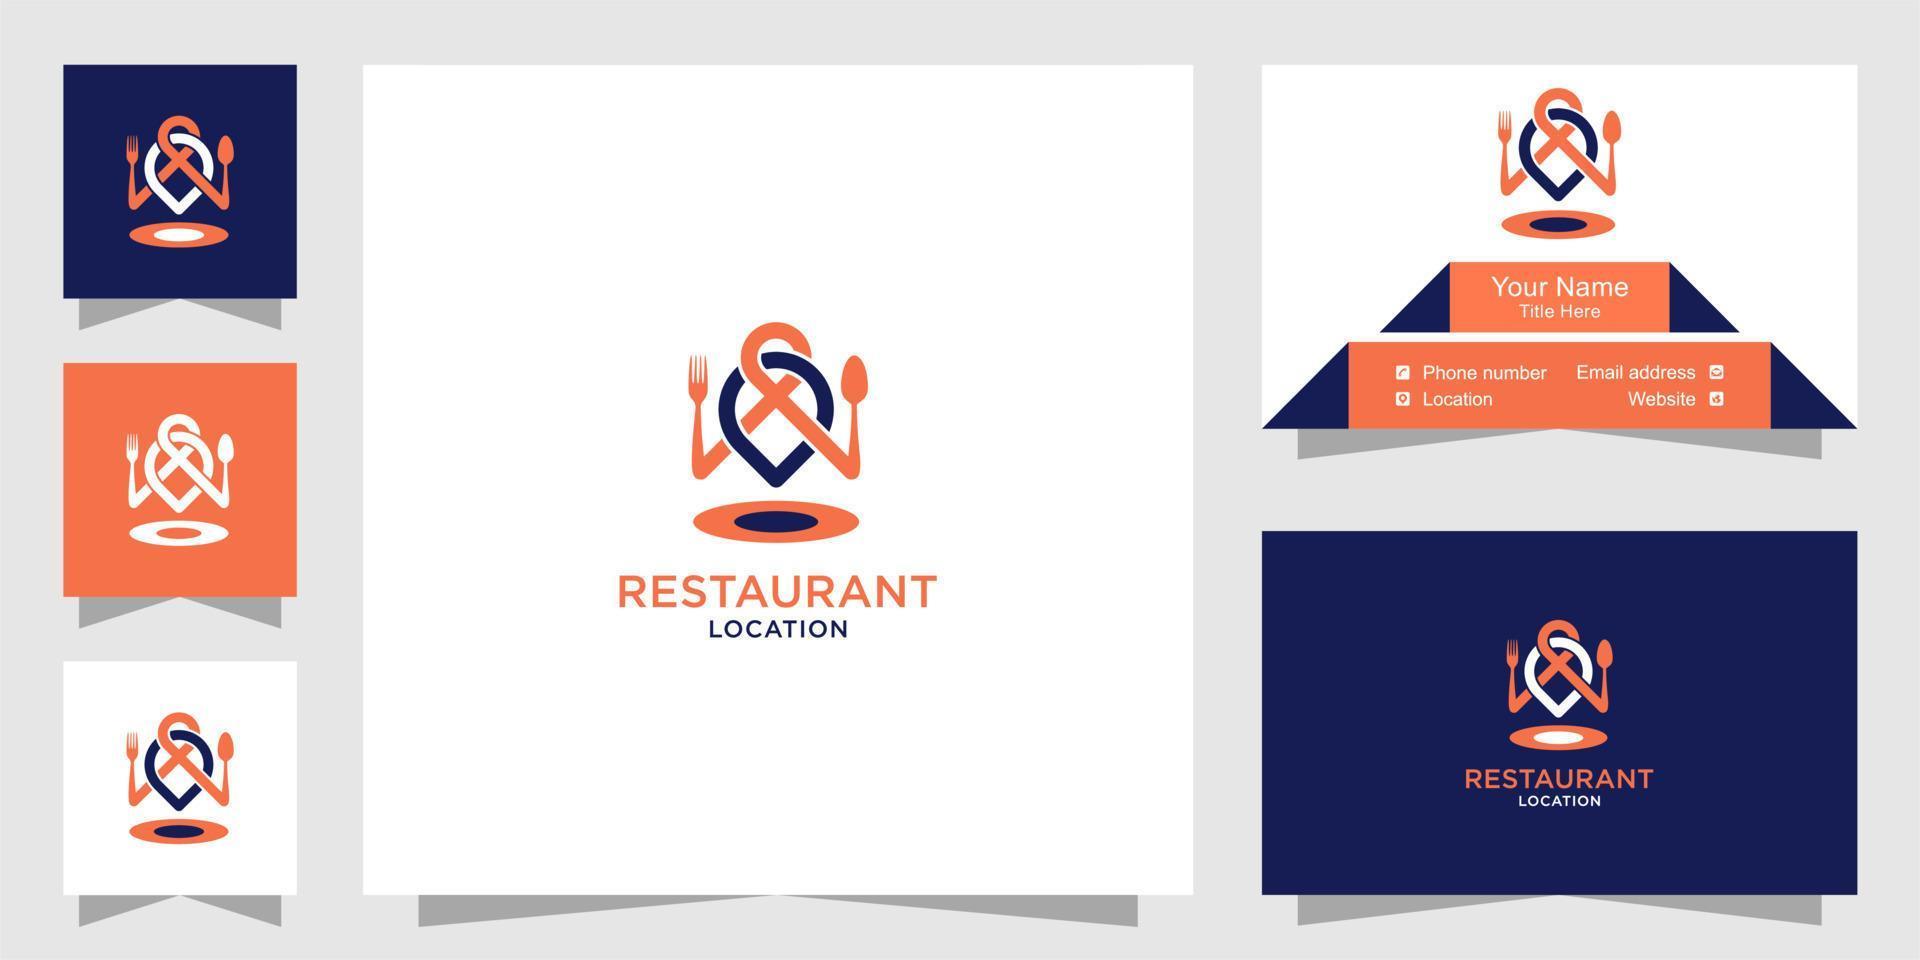 Food restaurant location logo and business card template vector